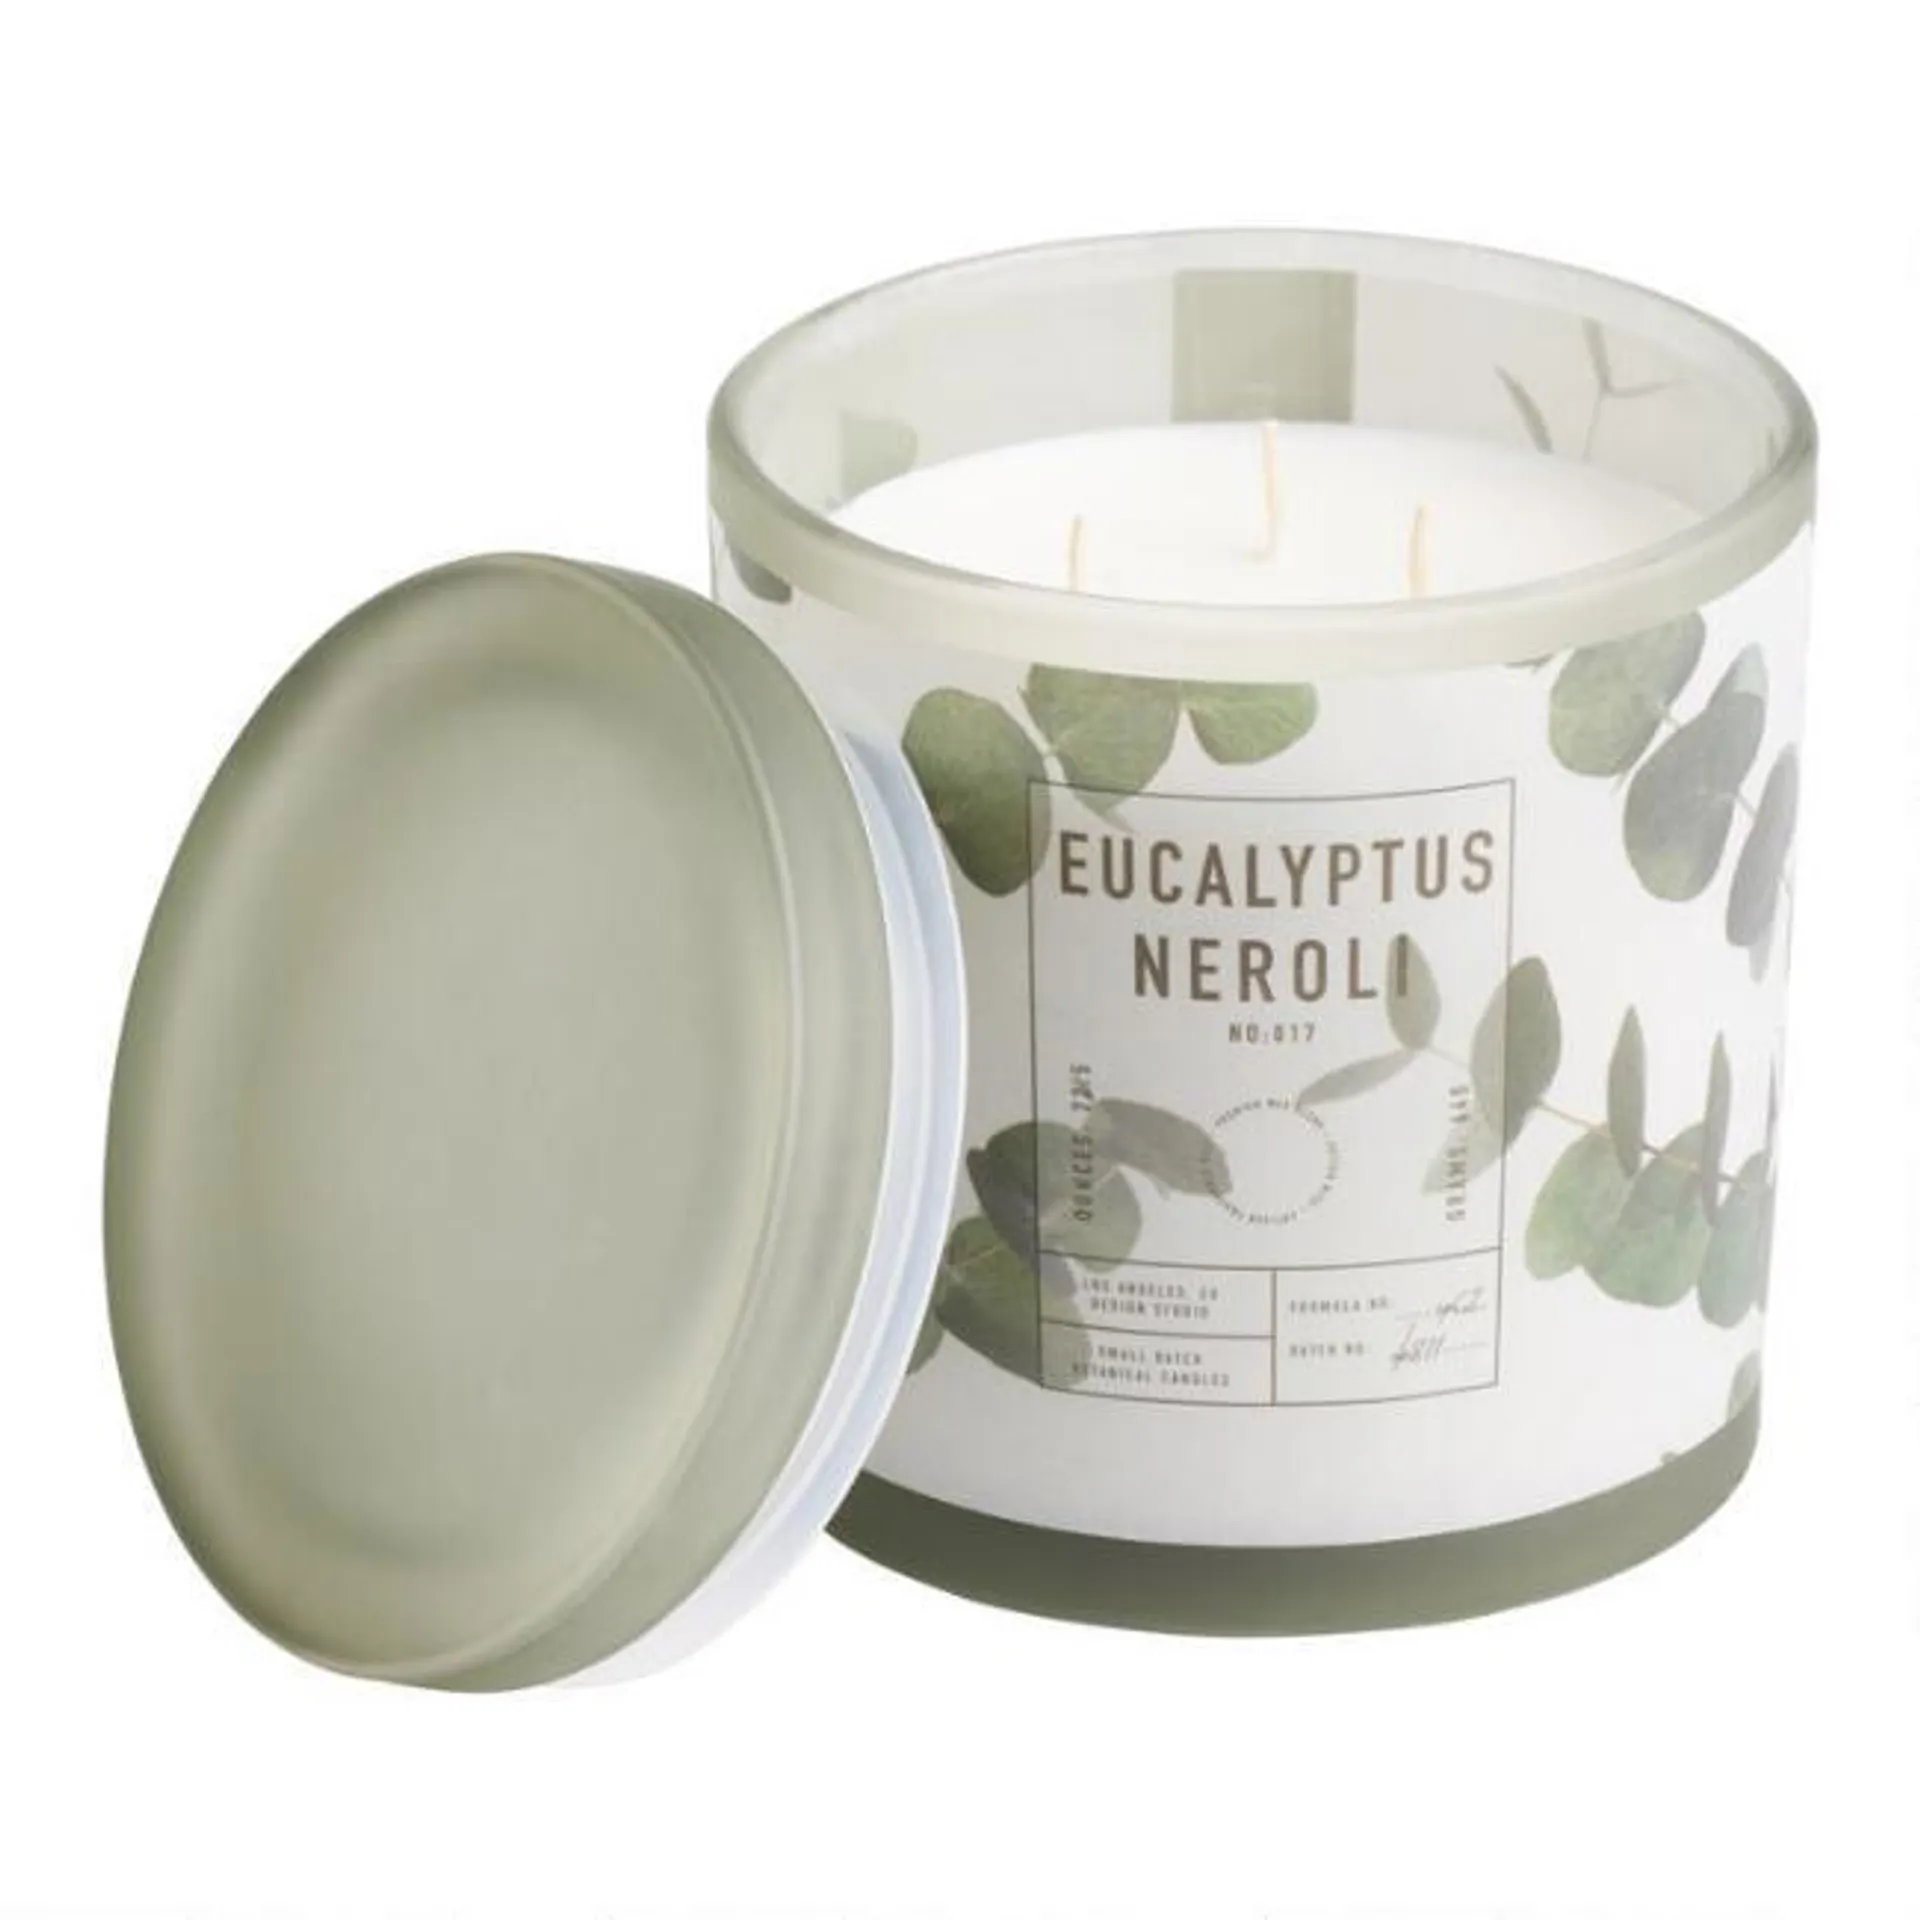 Large Eucalyptus and Neroli 3 Wick Scented Candle